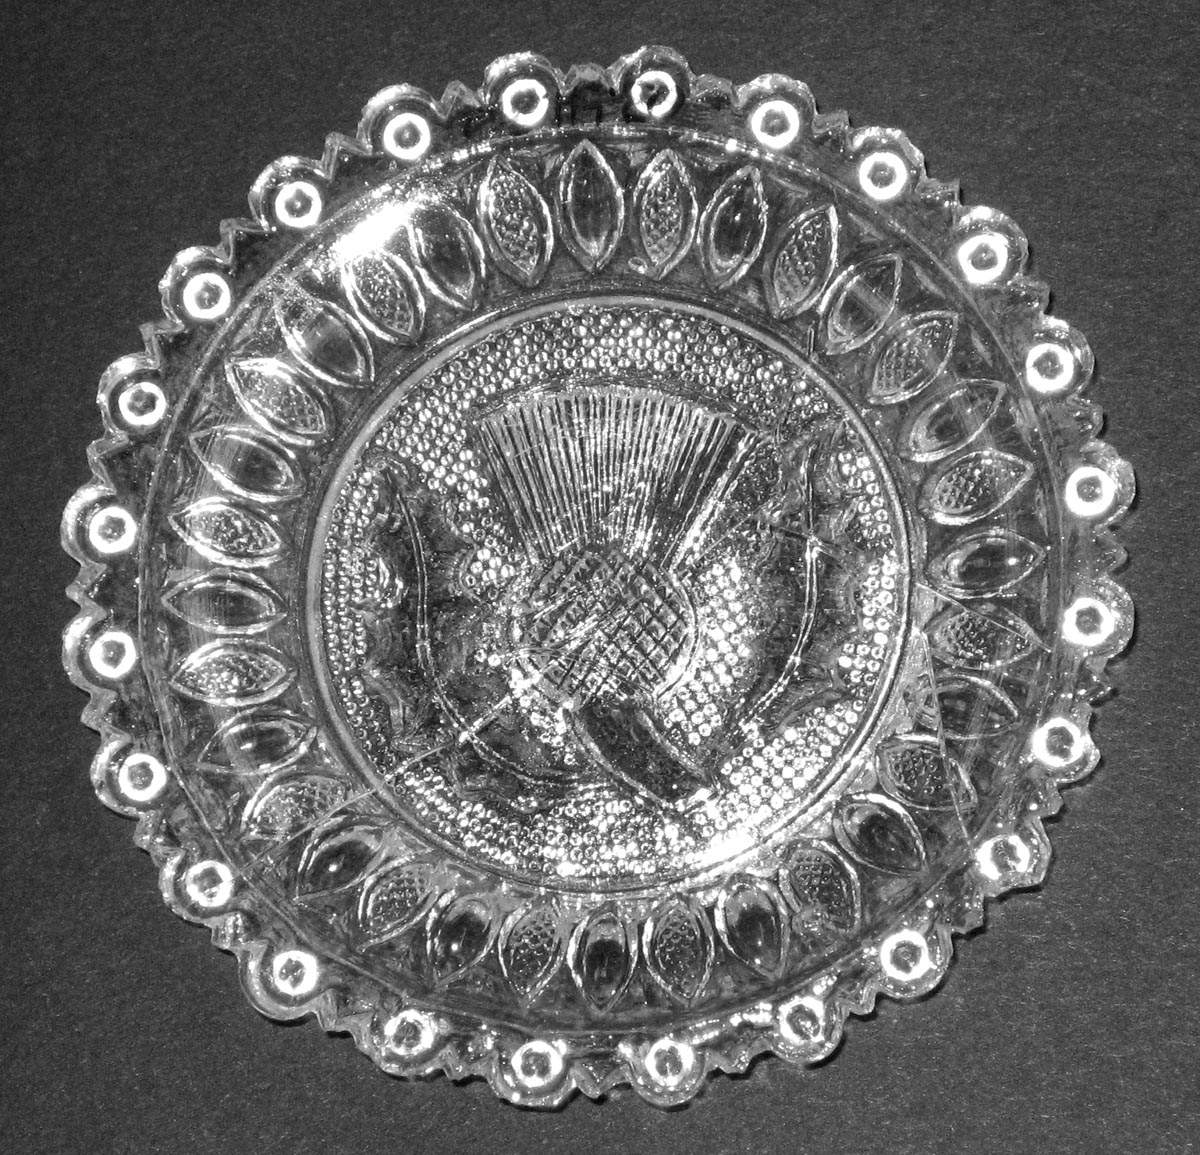 2003.0041.020 Thistle glass cup plate